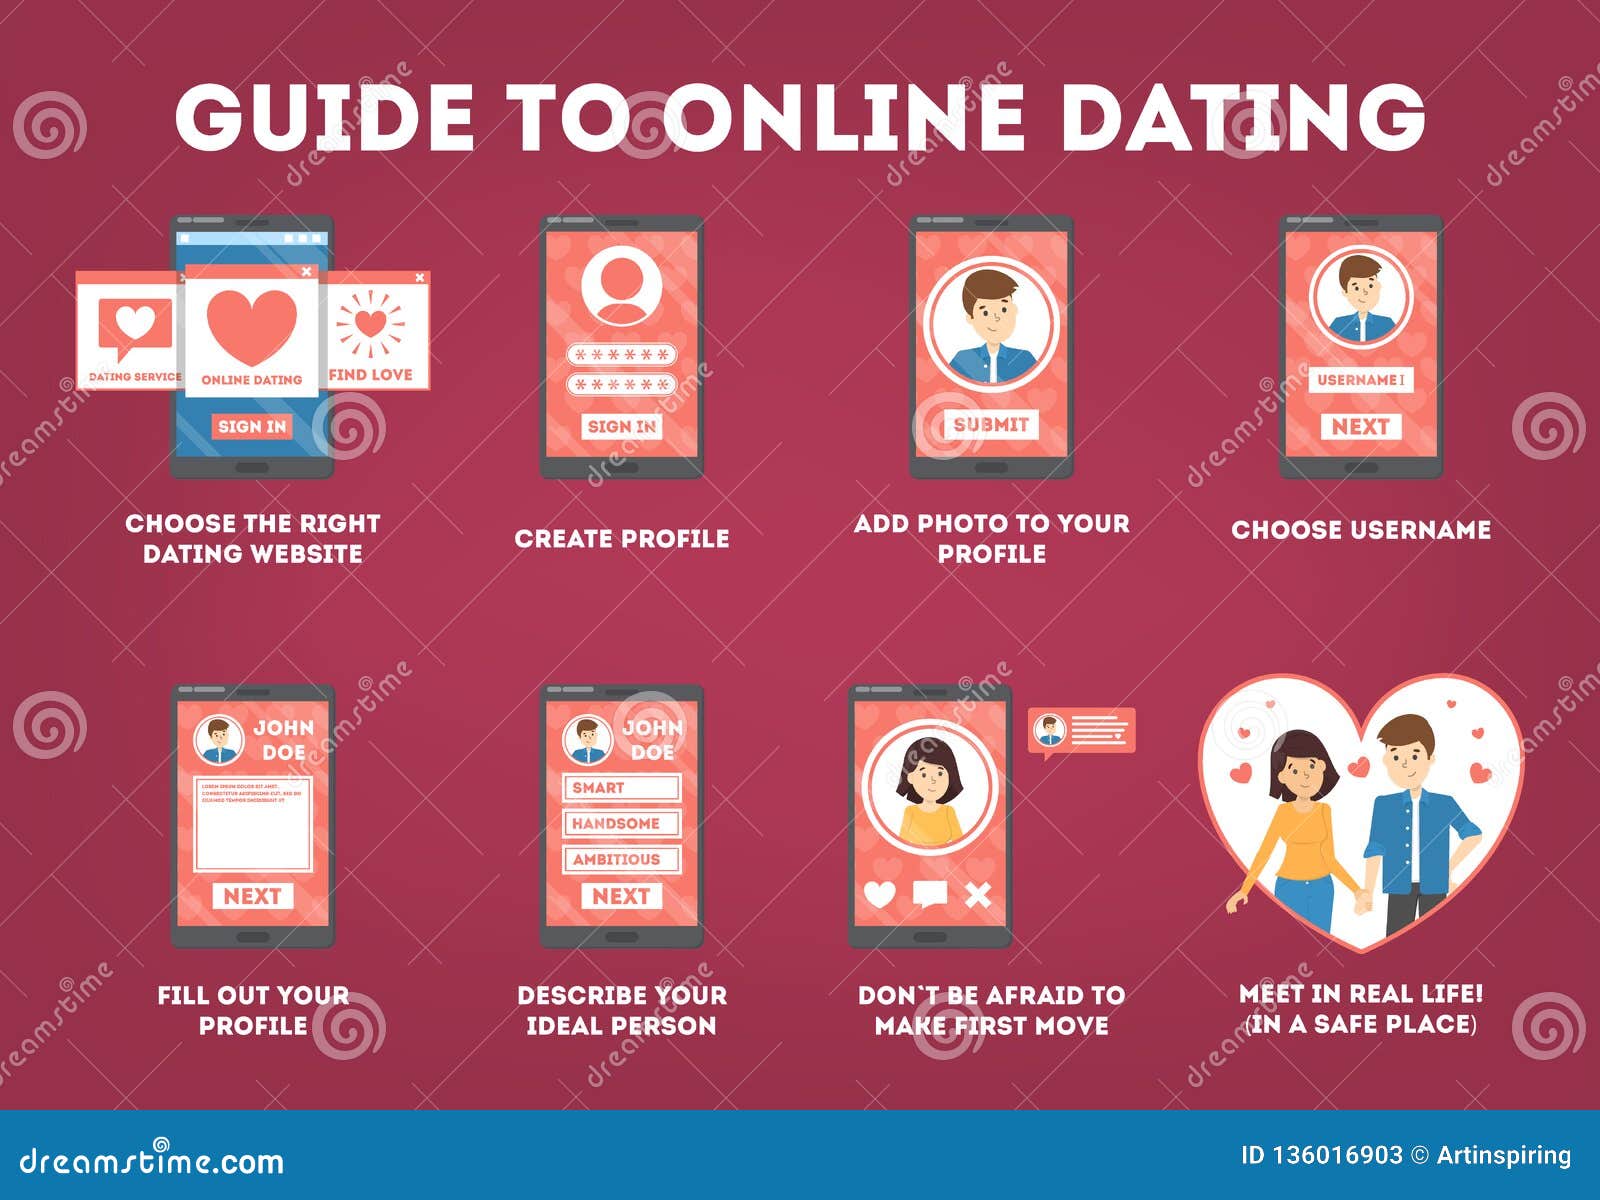 Why women should make the first move when online dating   CNN